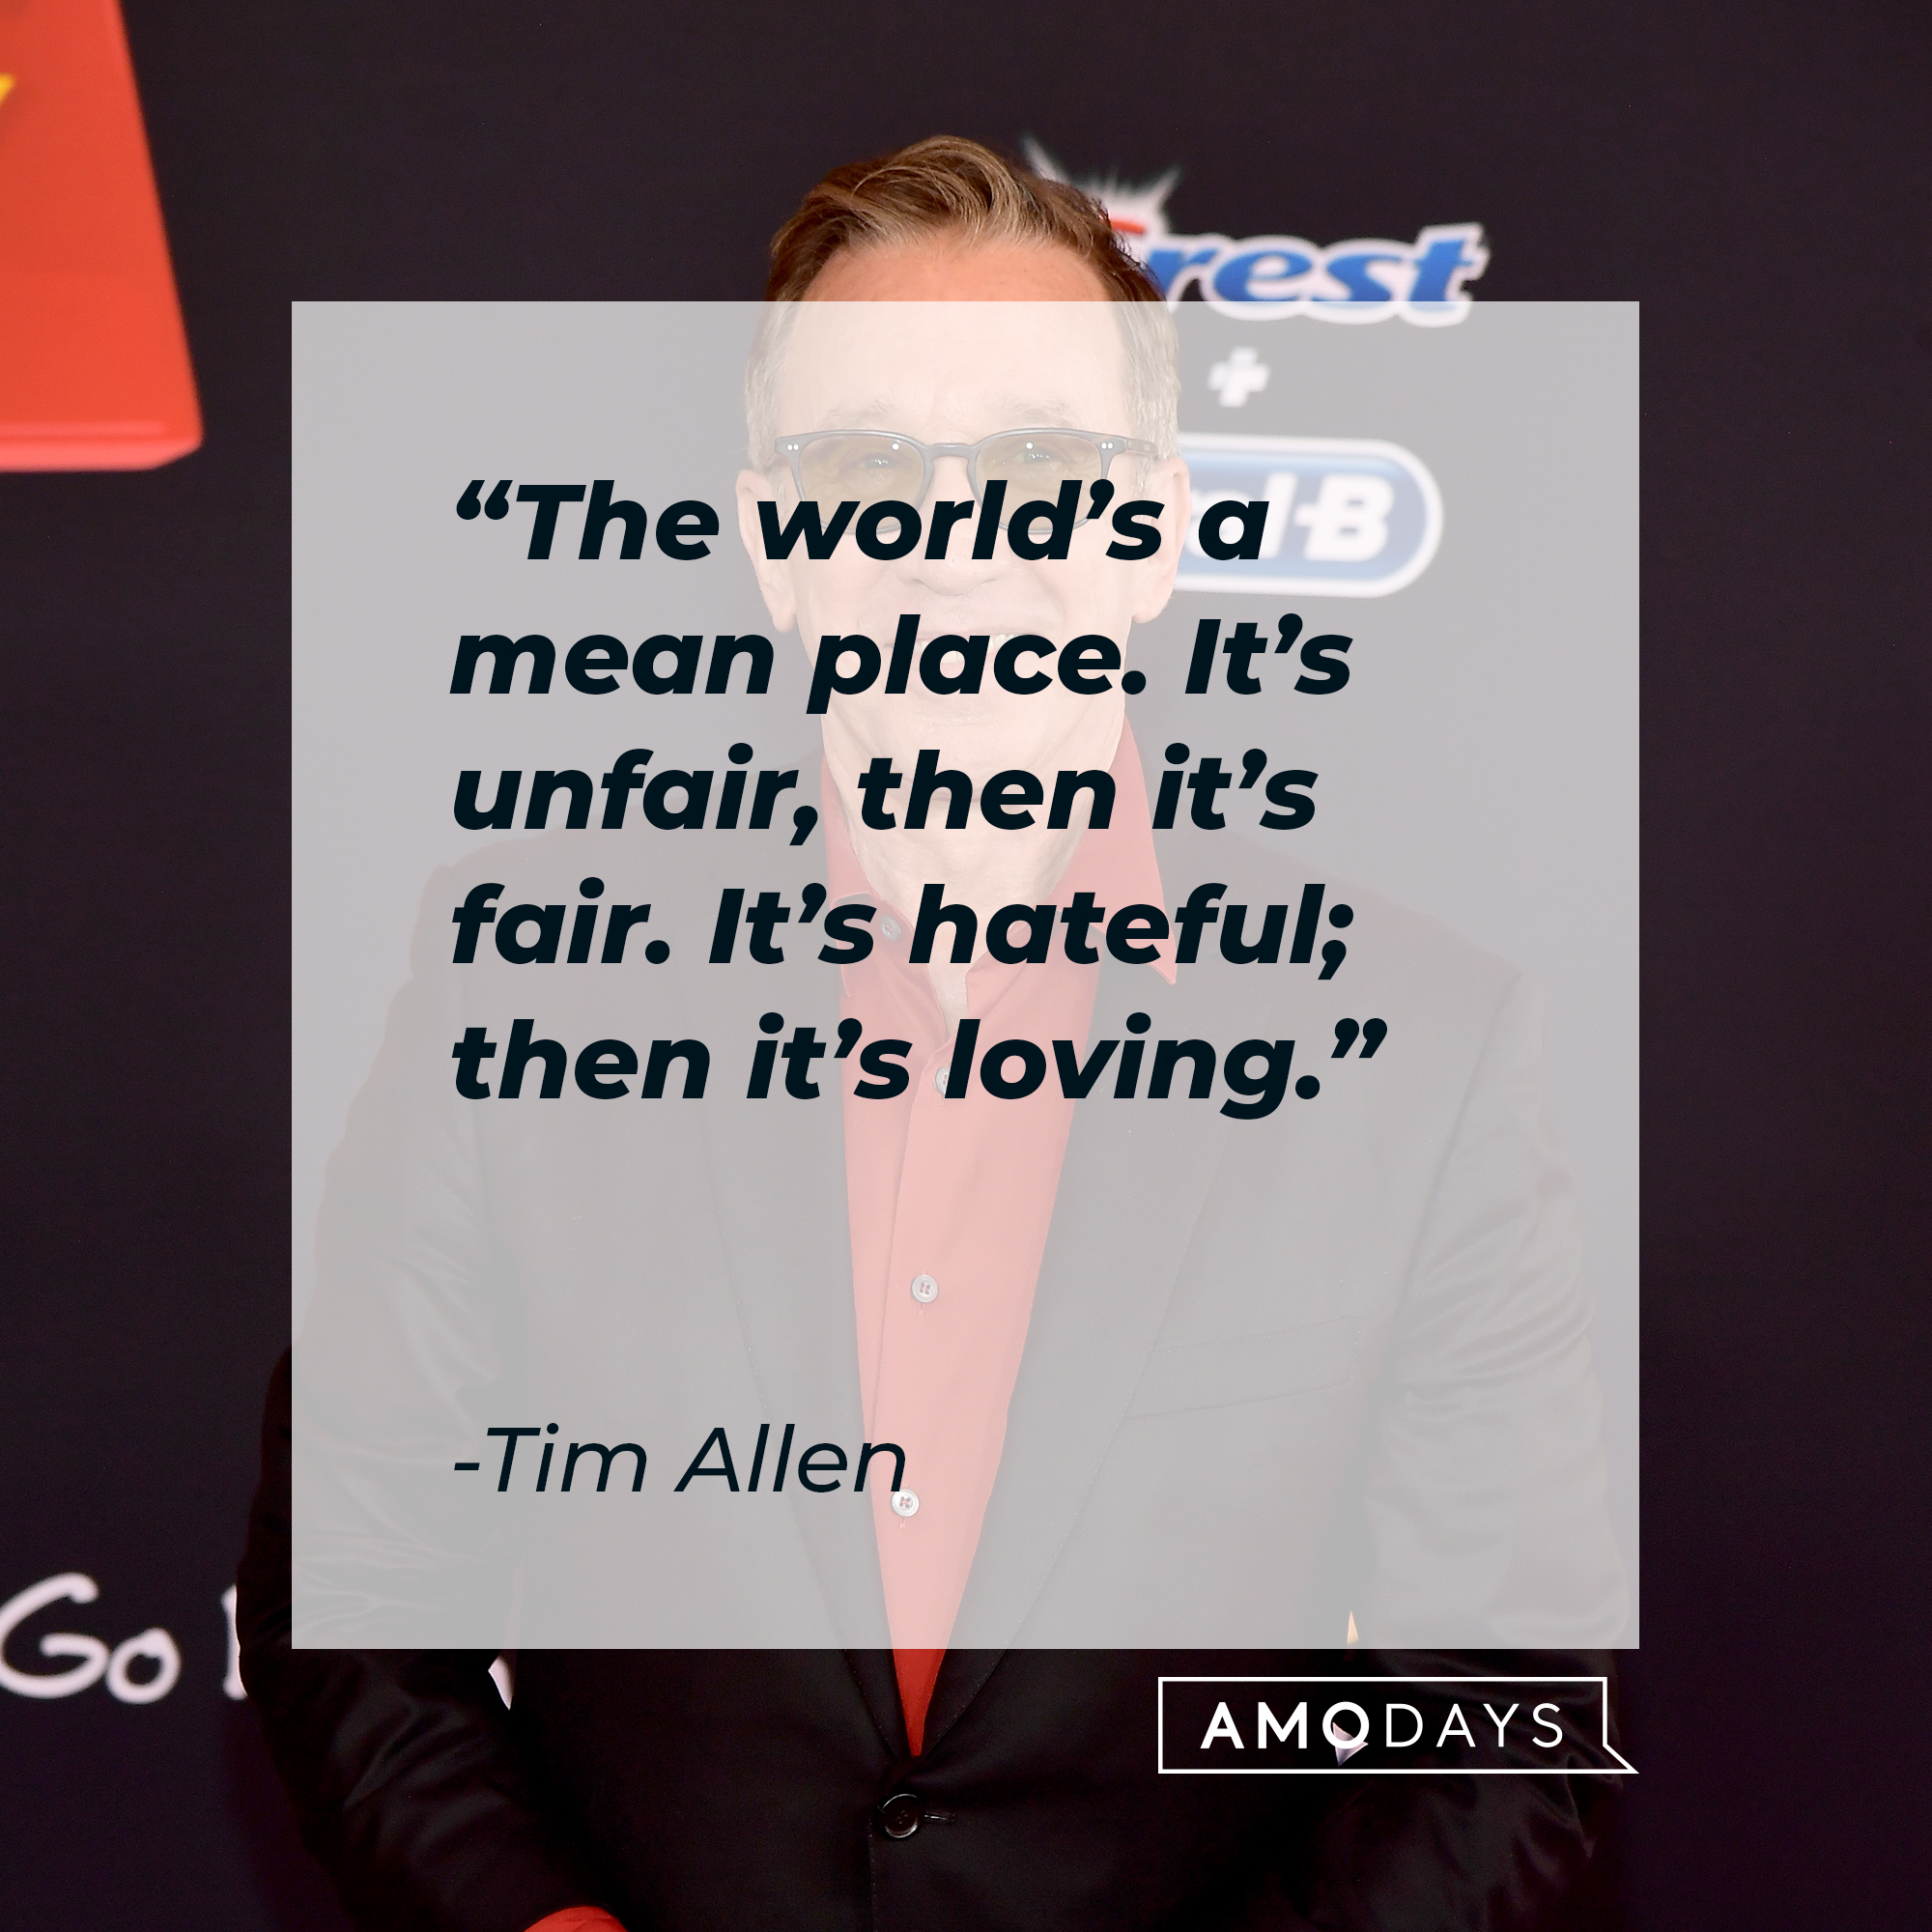 An image of Tim Allen, with his quote: “The world’s a mean place. It’s unfair, then it’s fair. It’s hateful; then it’s loving." ┃Source: Getty Images